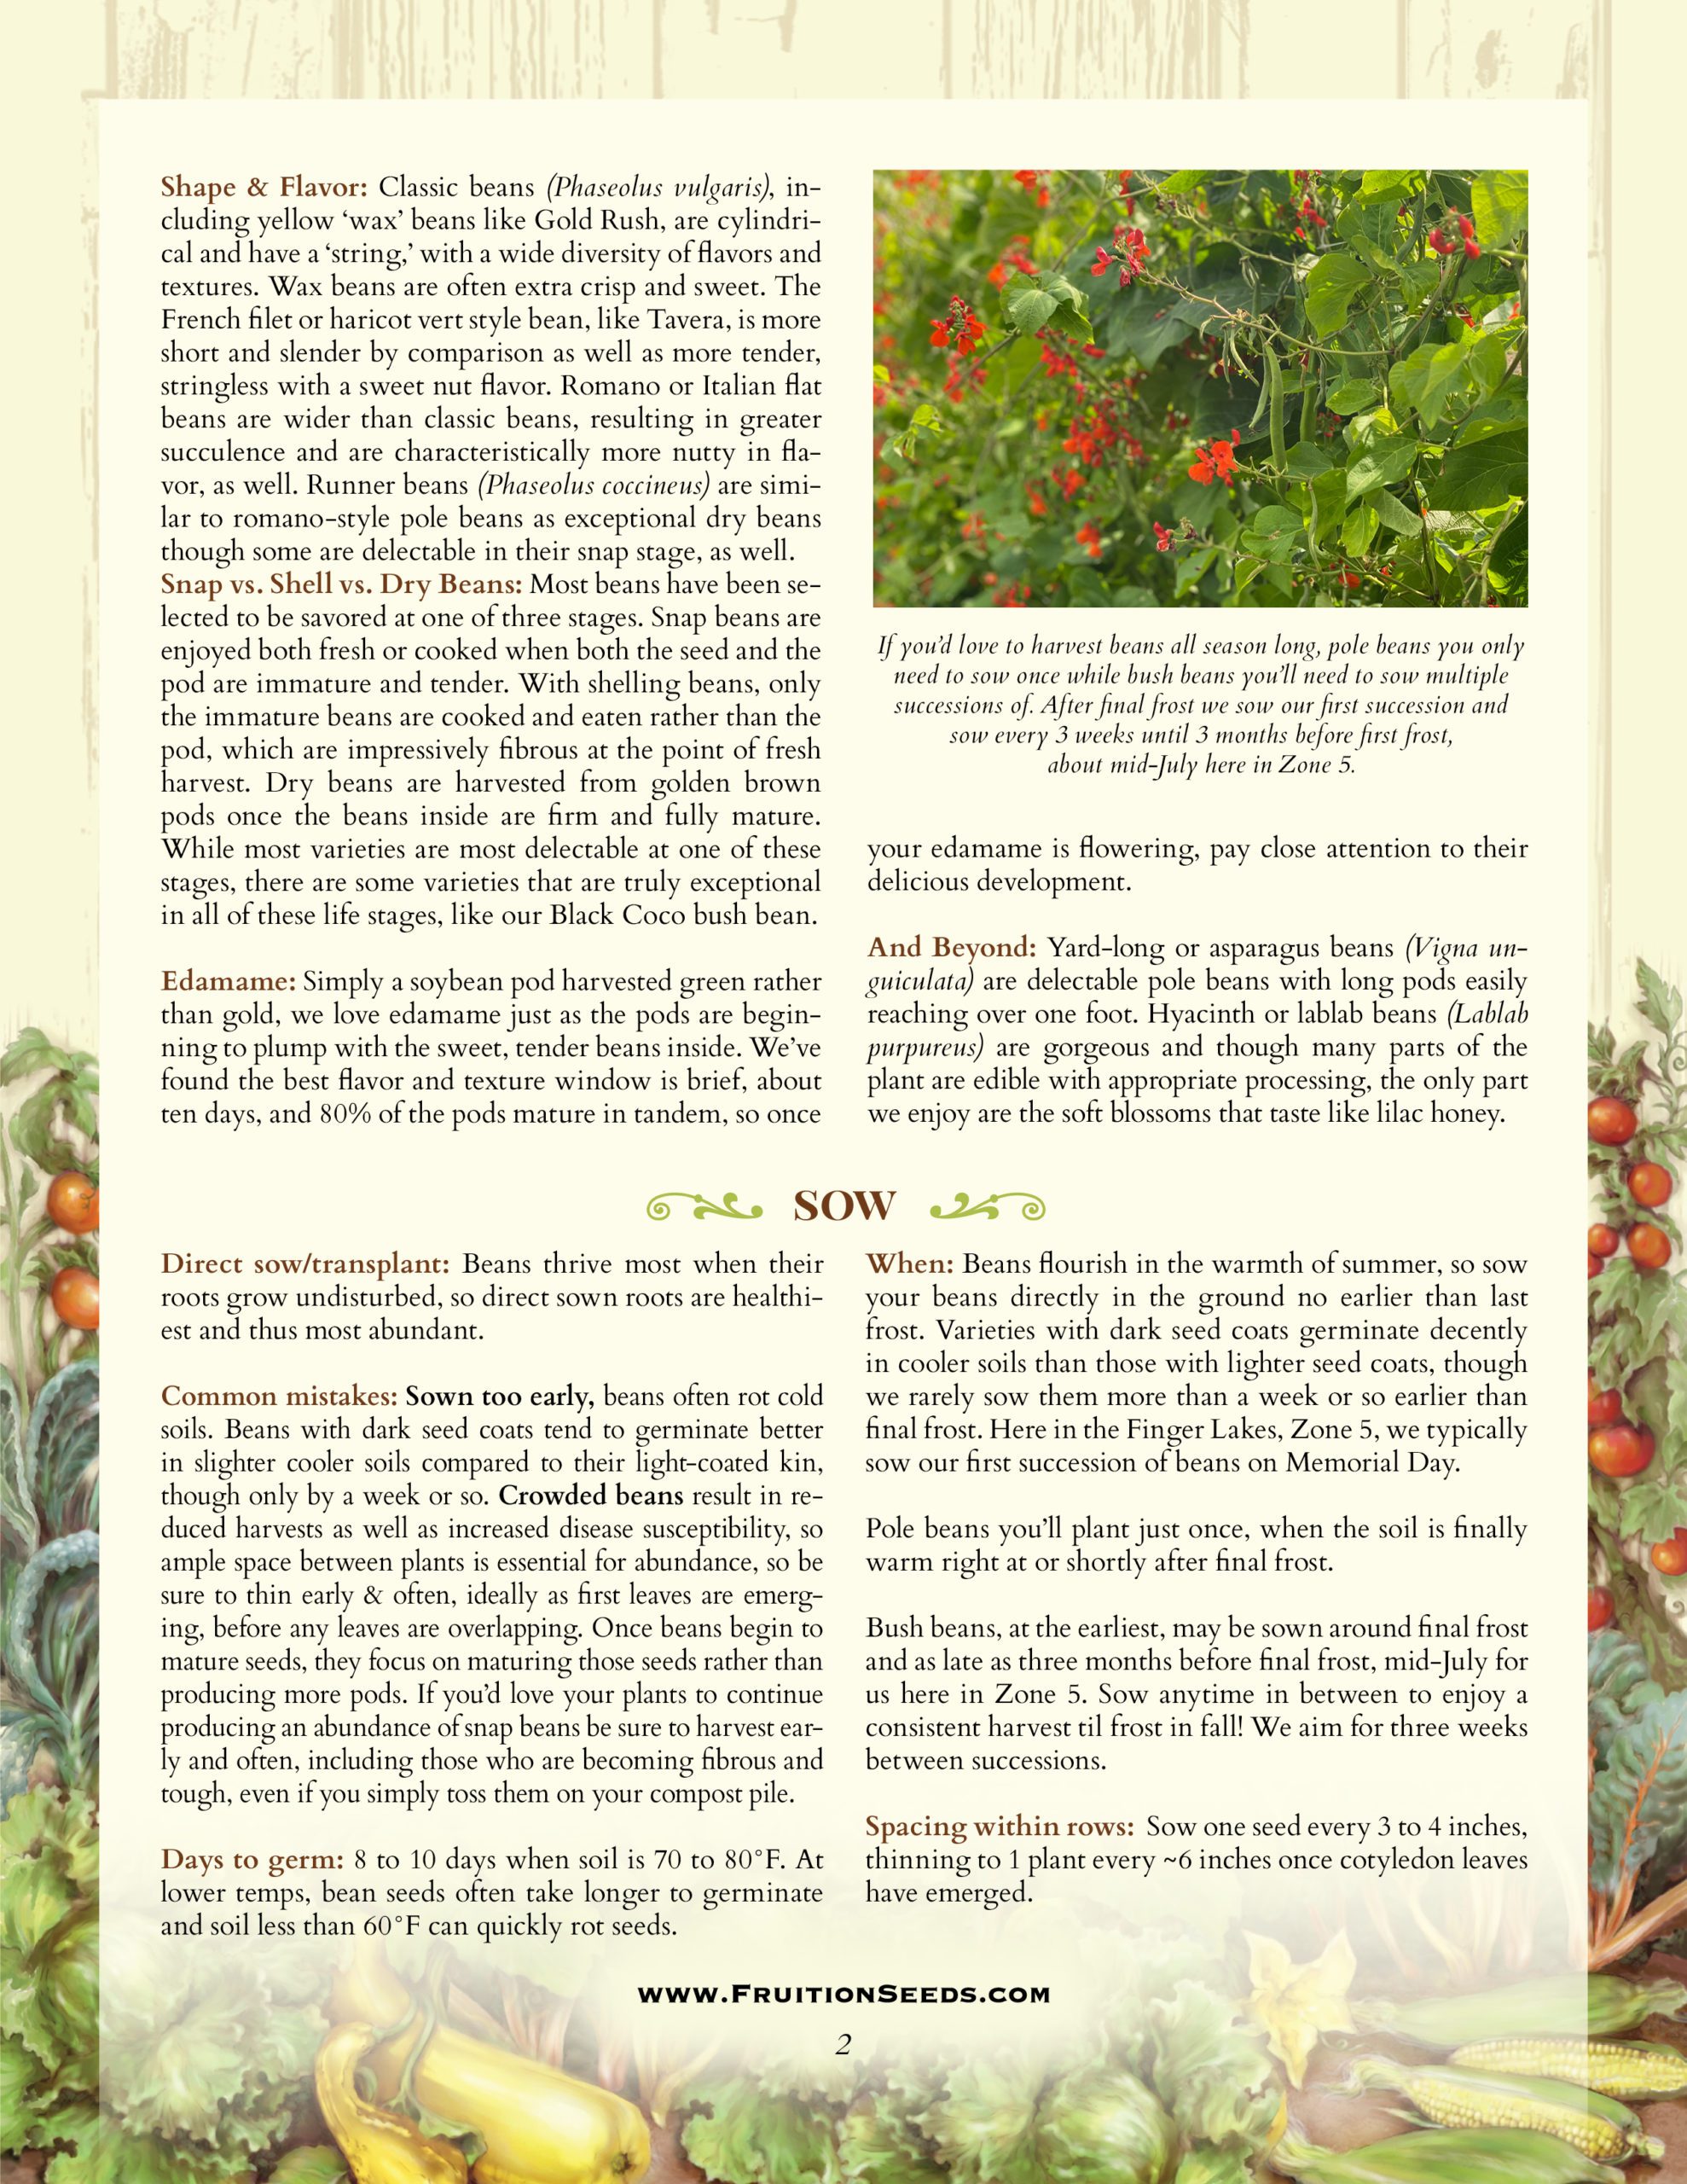 Growing Guide for Sowing & Growing Series: Beans